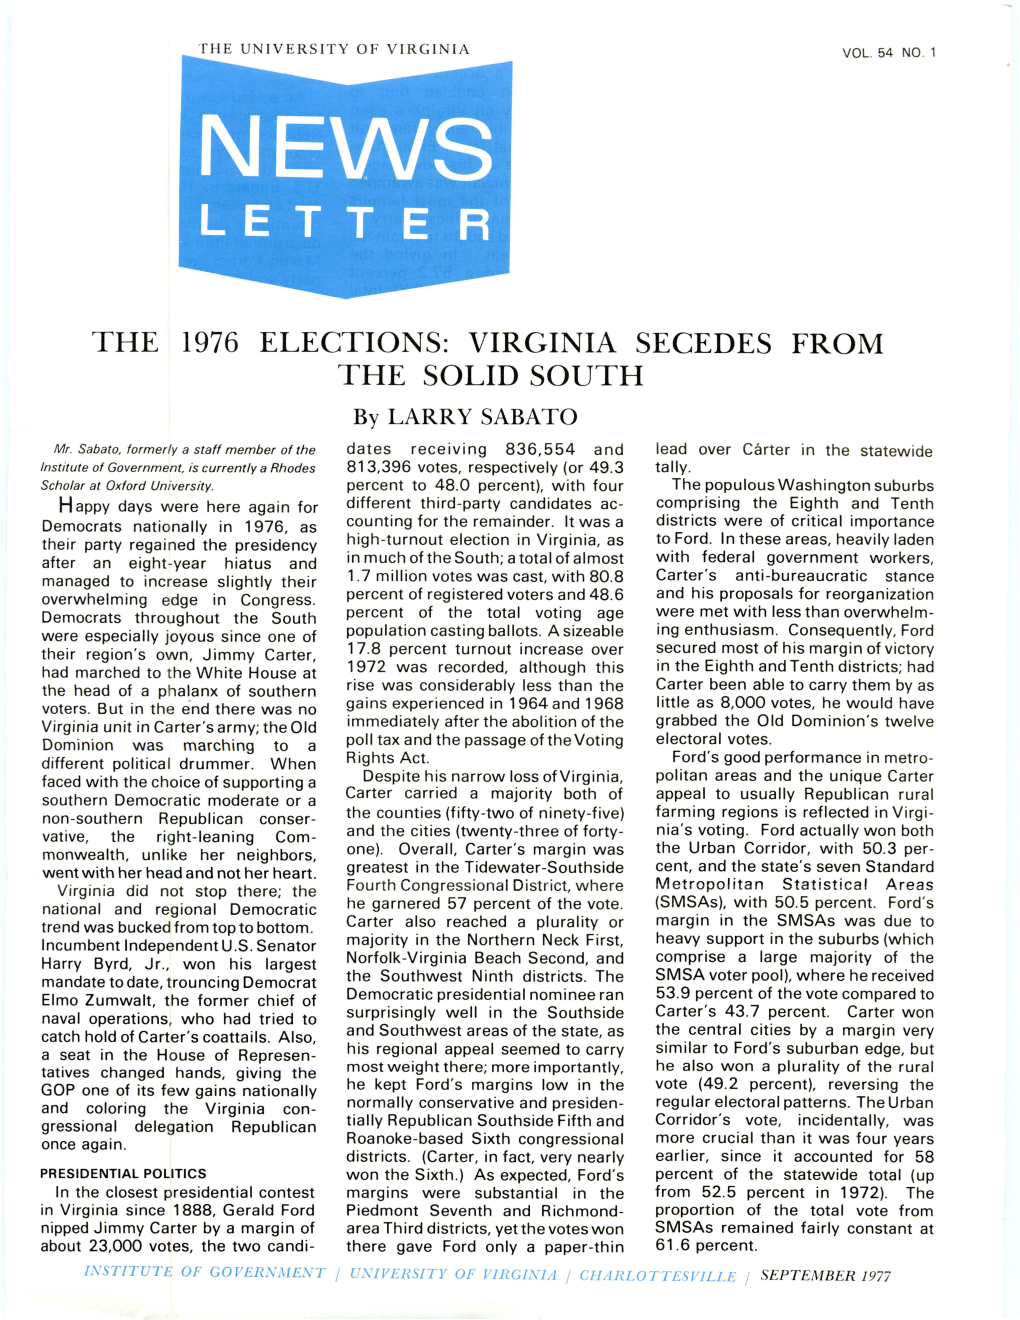 THE 1976 ELECTIONS: VIRGINIA SECEDES from the SOLID SOUTH by LARRY SABATO